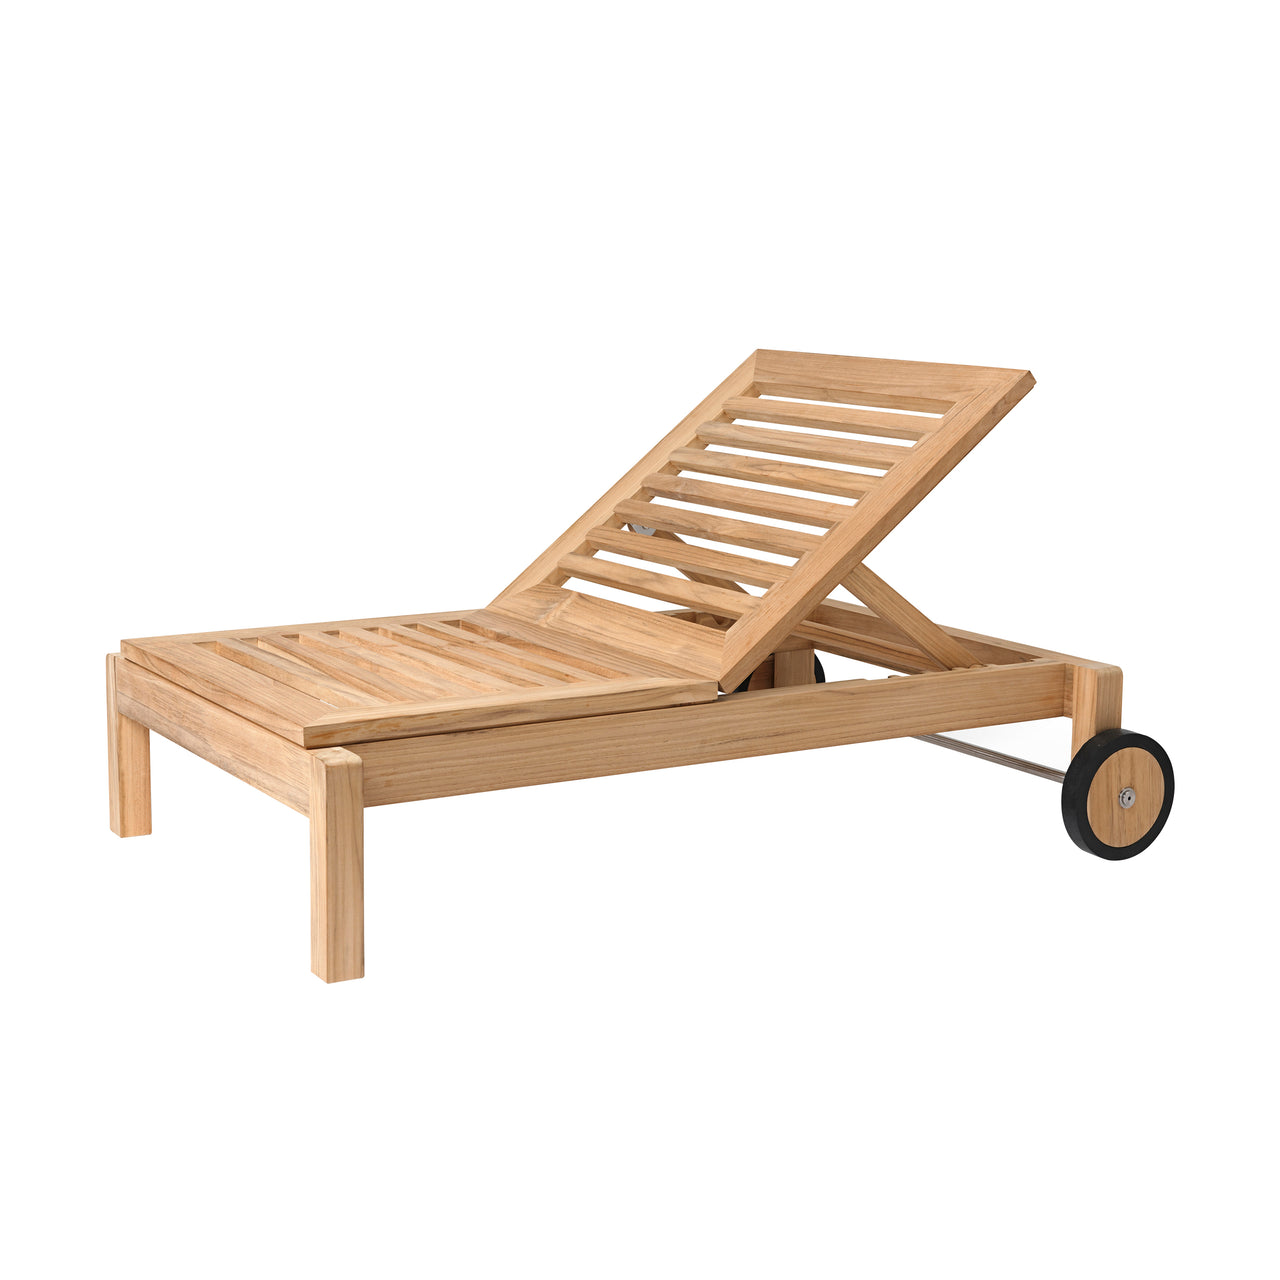 AH604 Outdoor Lounger: Without Cushion